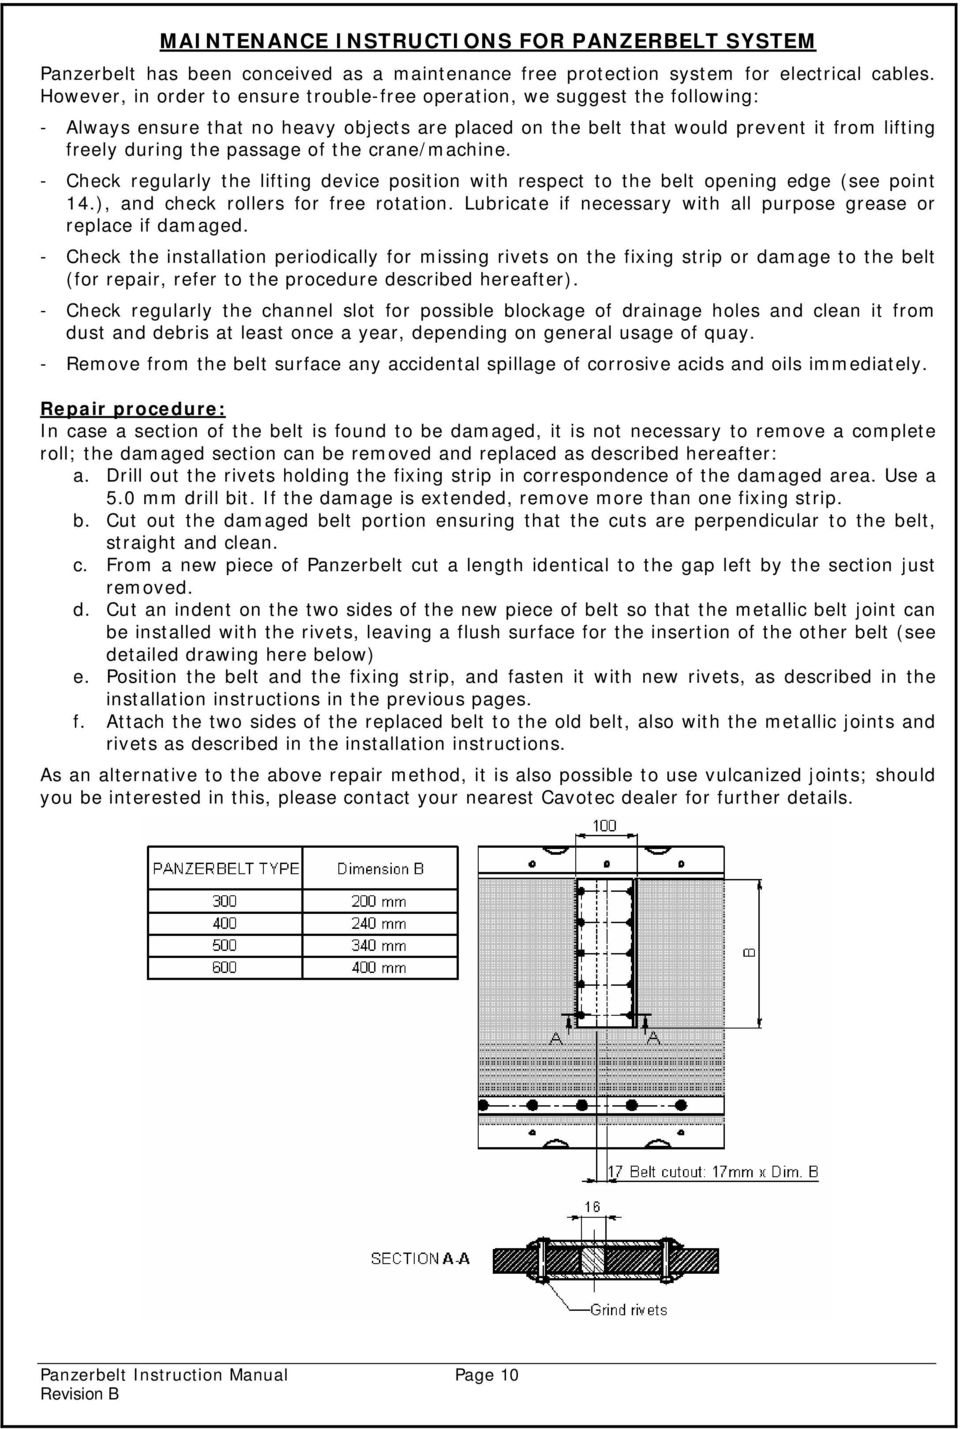 of the crane/machine. - Check regularly the lifting device position with respect to the belt opening edge (see point 14.), and check rollers for free rotation.